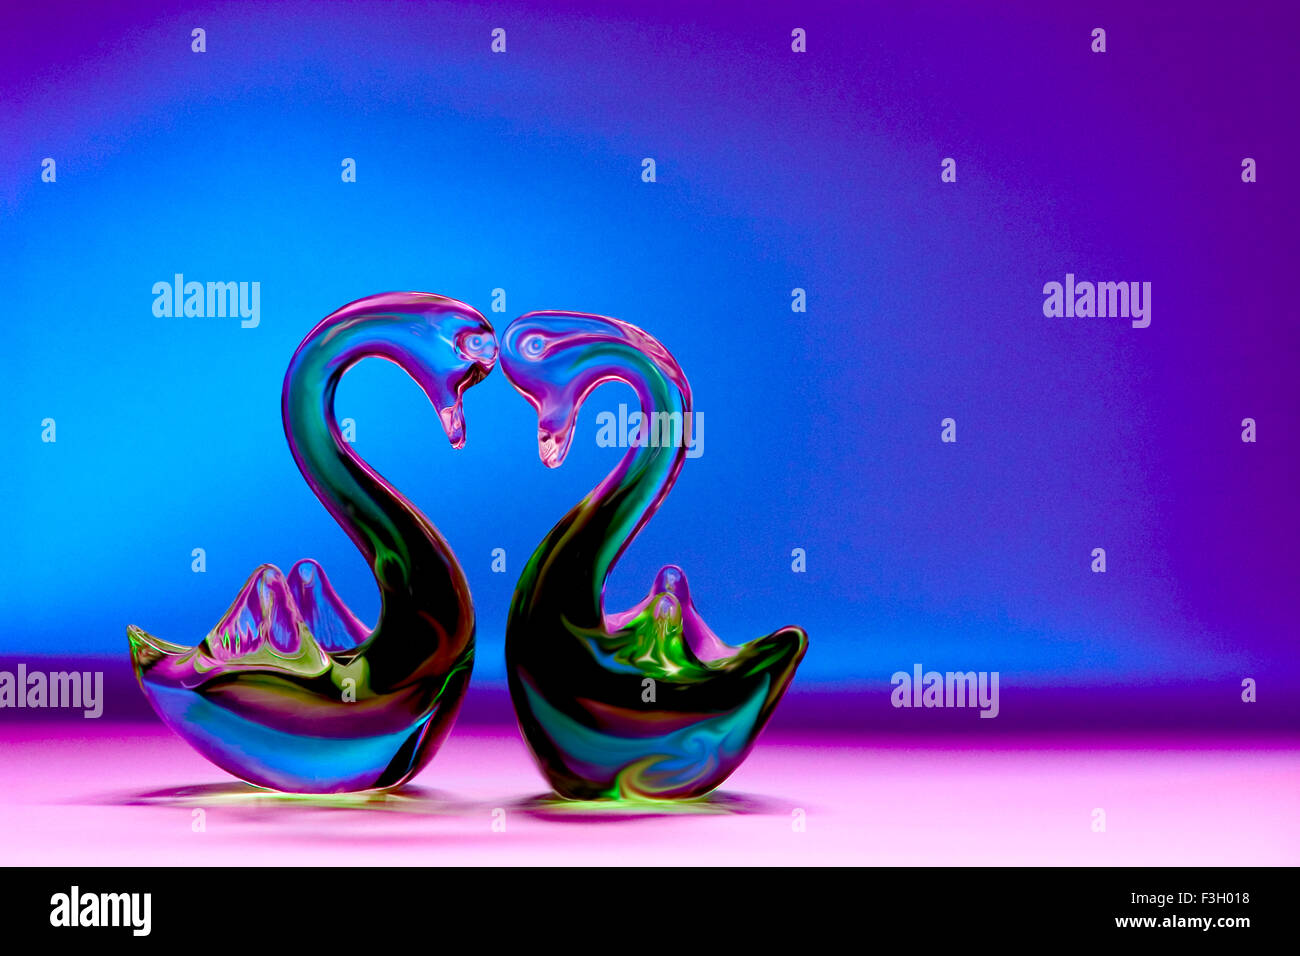 Concept couple double husband wife lover pair twice twin two gift item showpiece swan from glass modern fine art photography Stock Photo